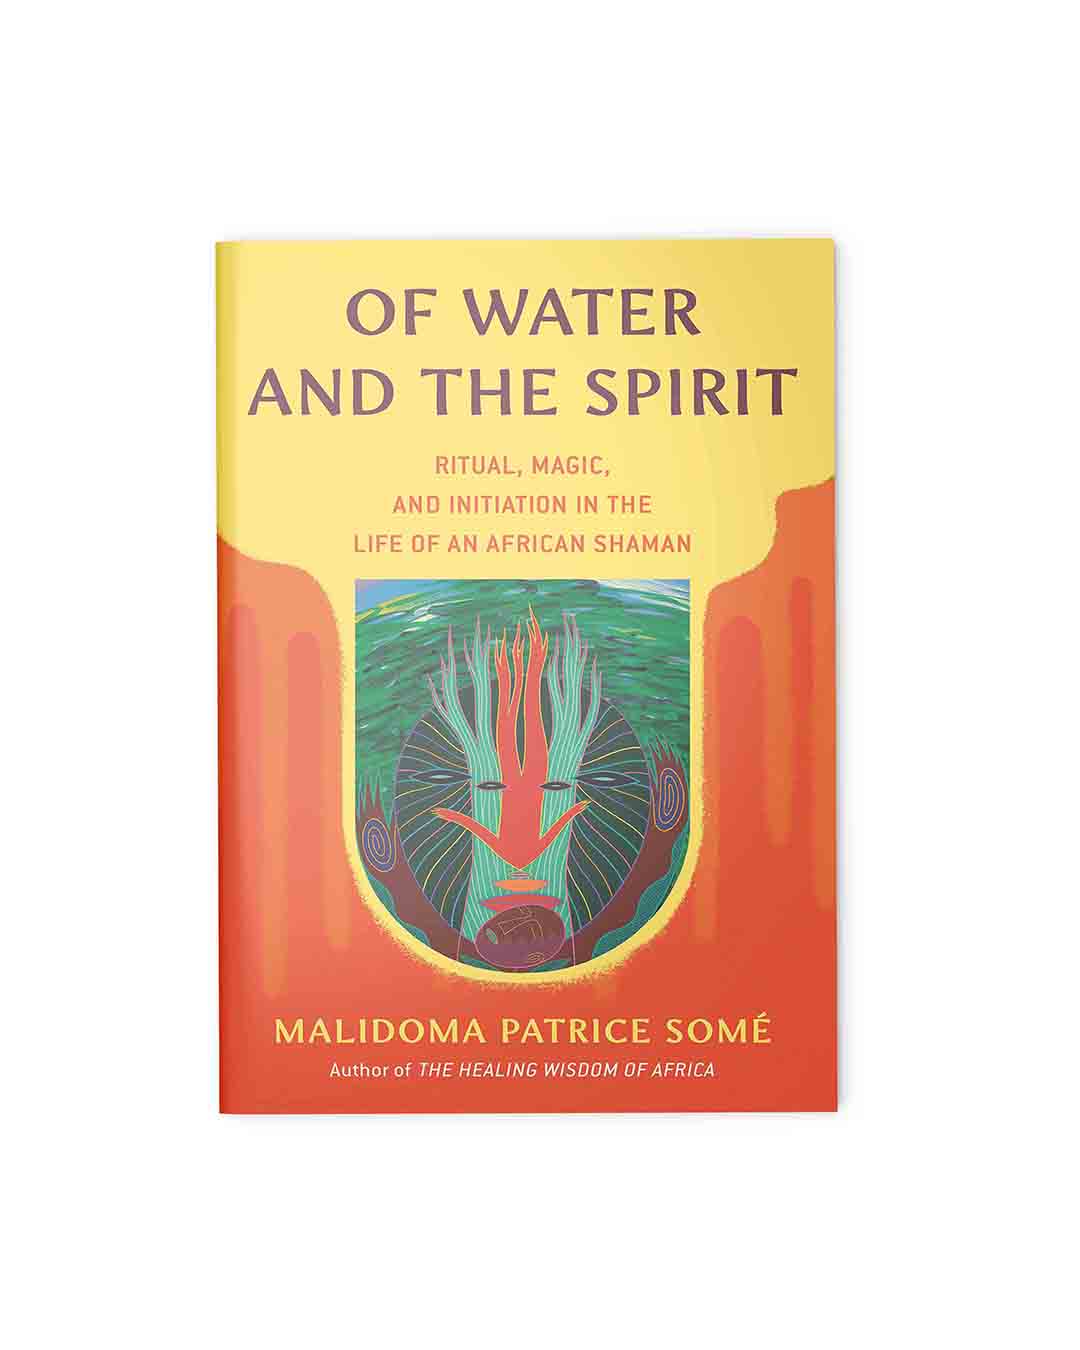 Of Water and the Spirit: Ritual, Magic and Initiation in the Life